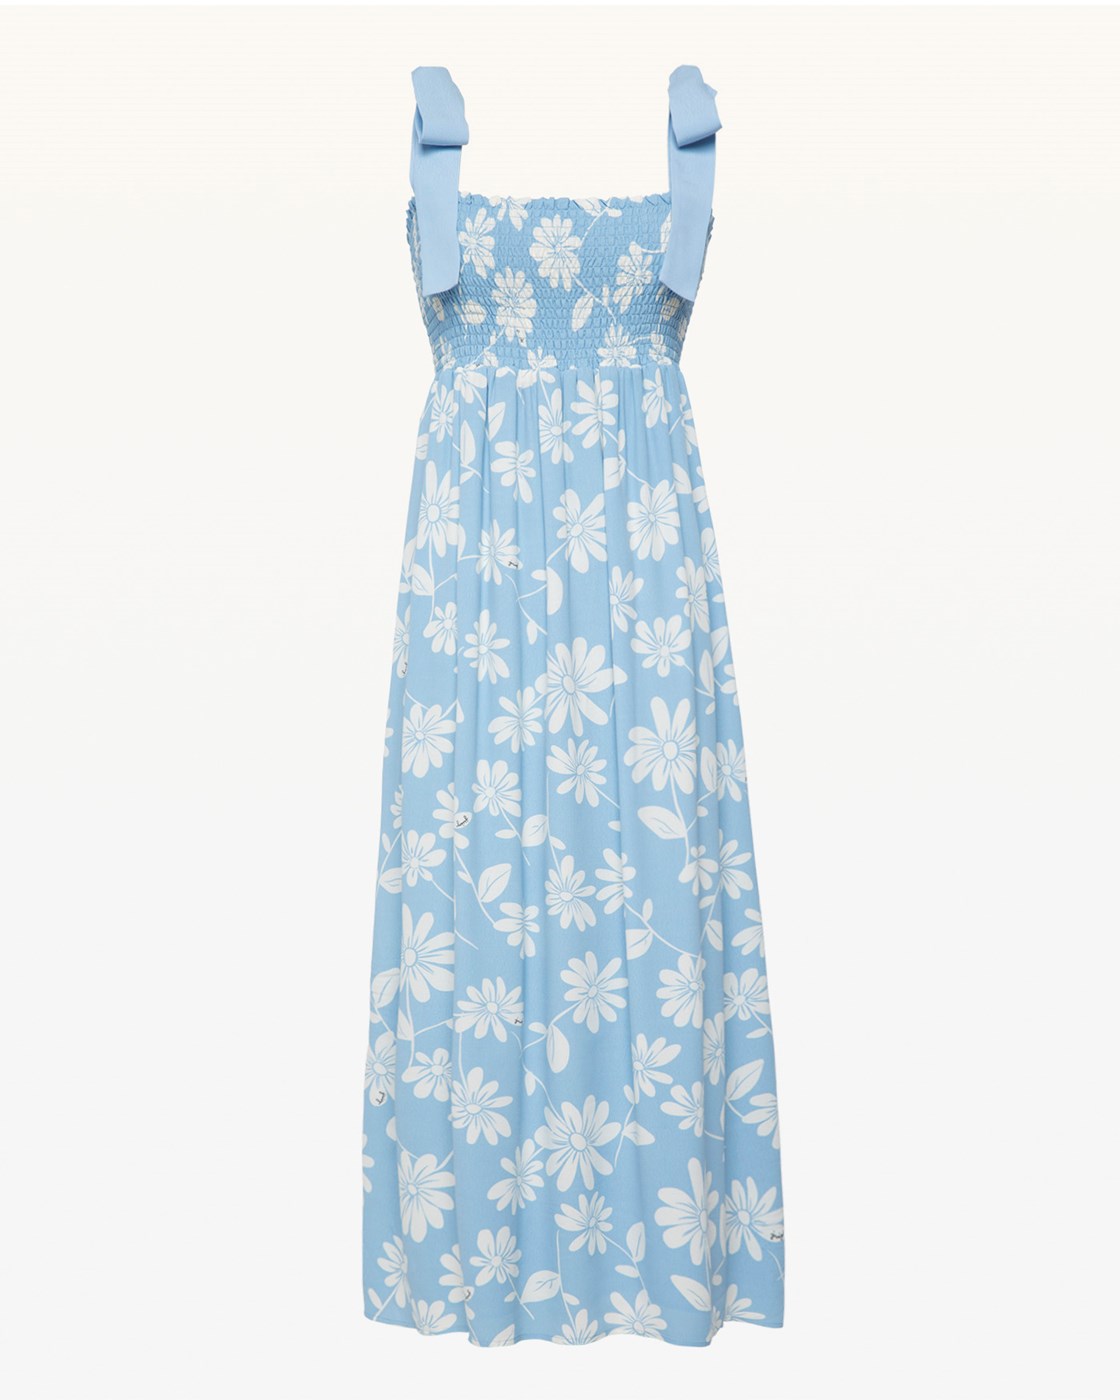 Juicy Couture Sketched Daisies Midi Dress